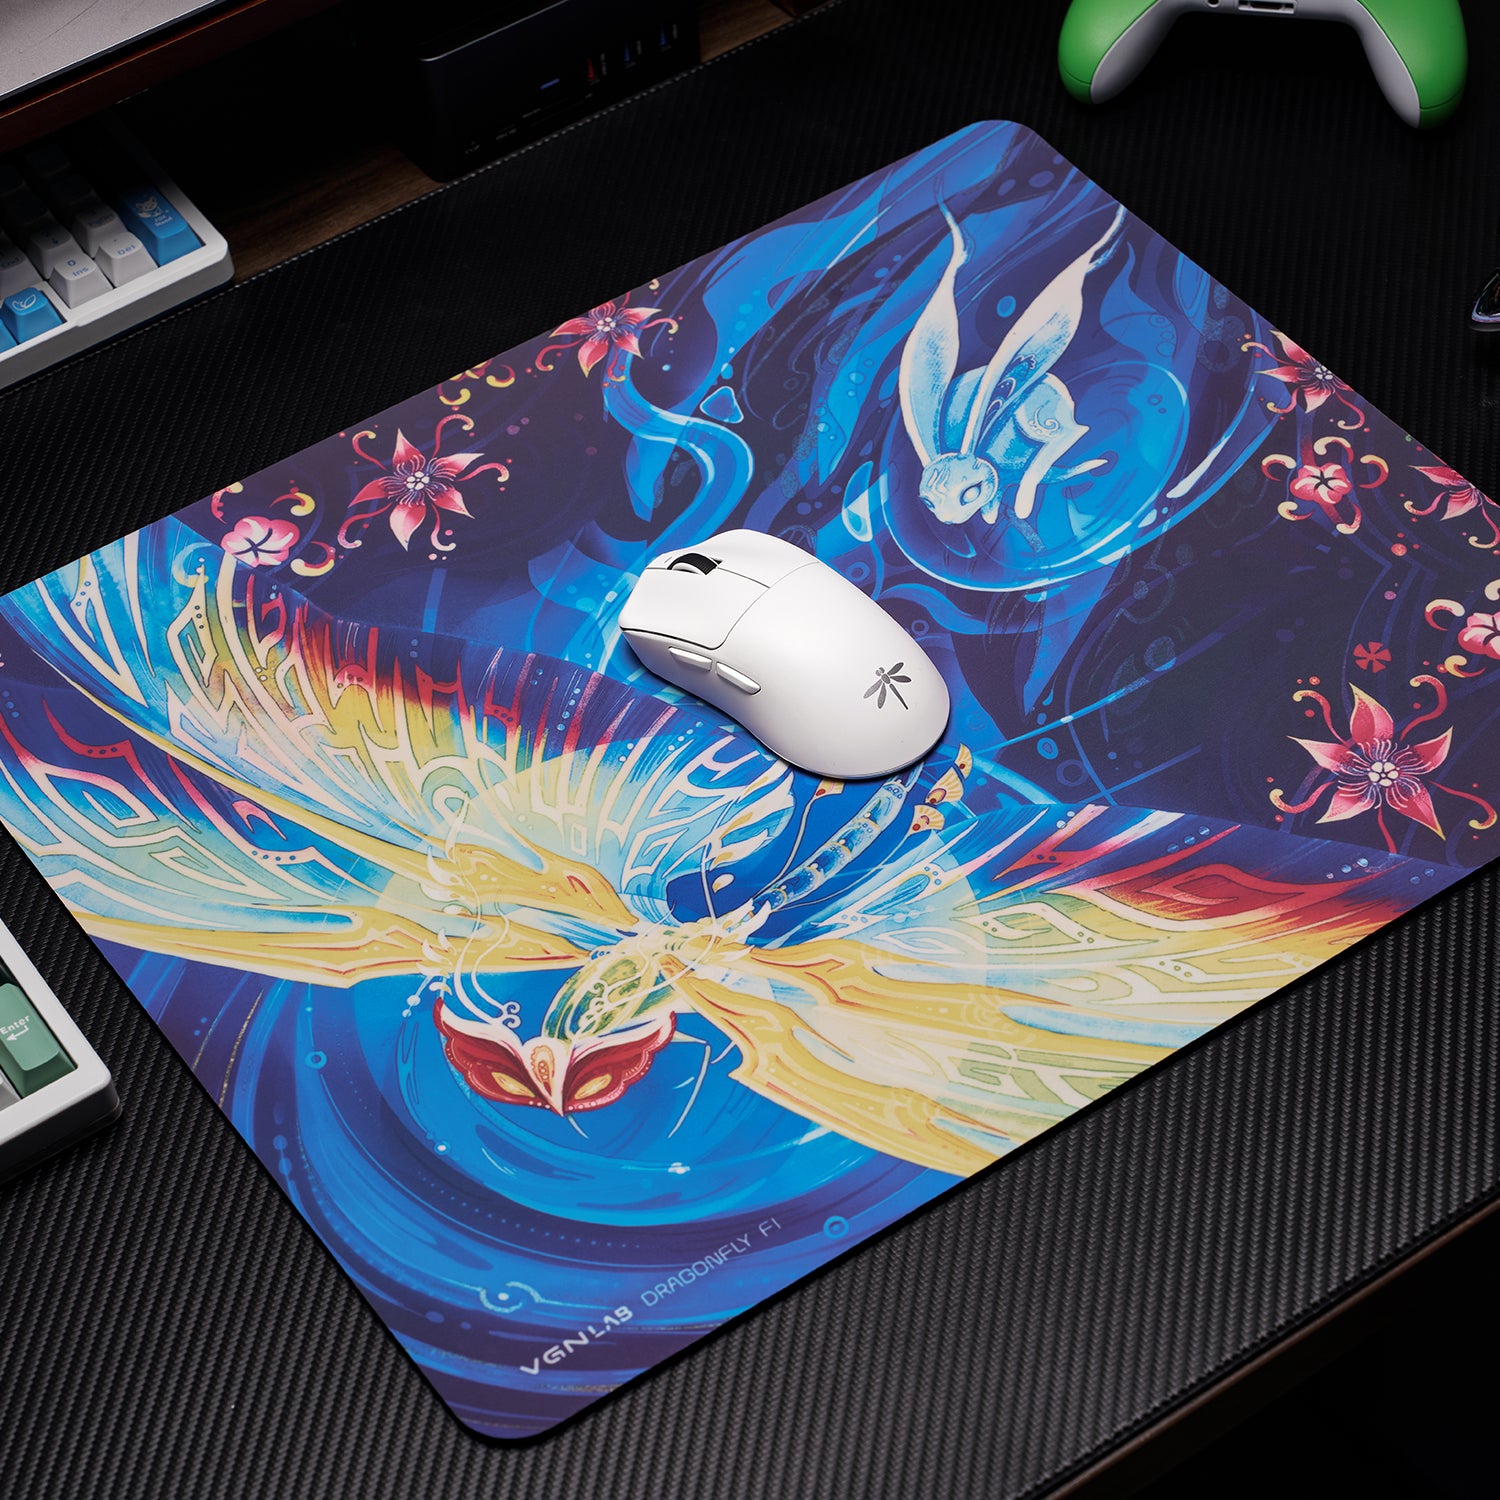 Red Dragon Glaurung Mouse Pad